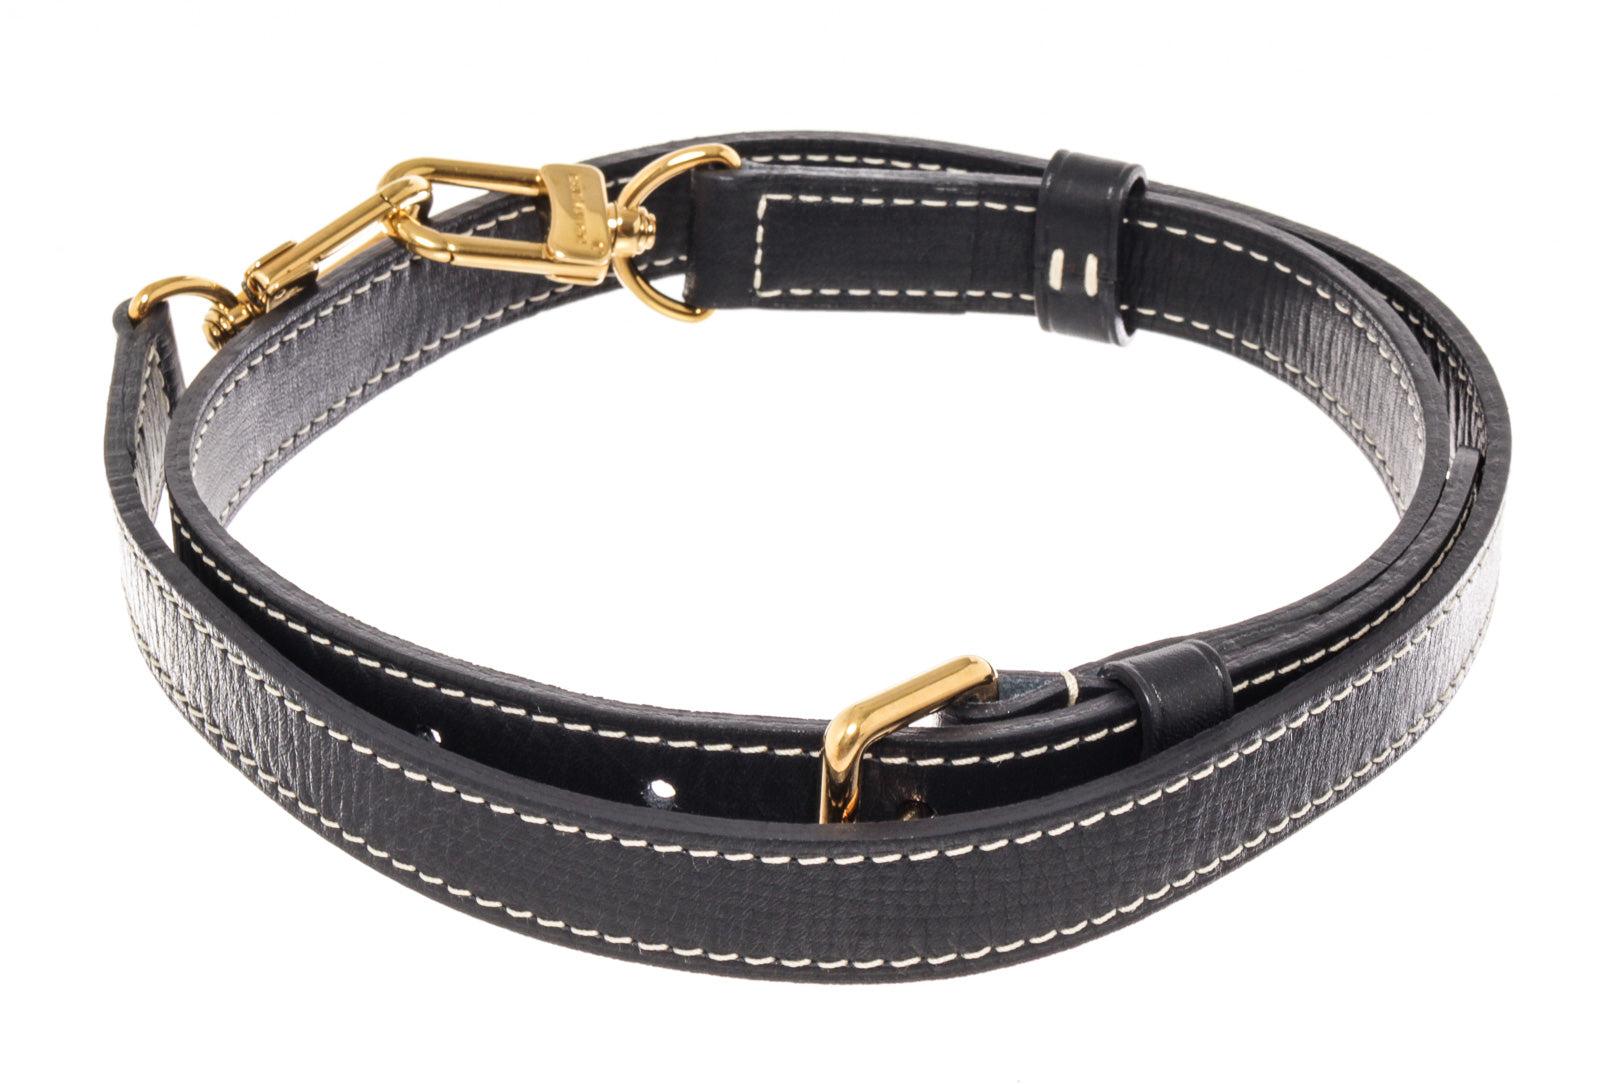 Louis Vuitton Navy Leather Extender Strap with leather, tan vachetta leather, turn lock closure.
61204MSC